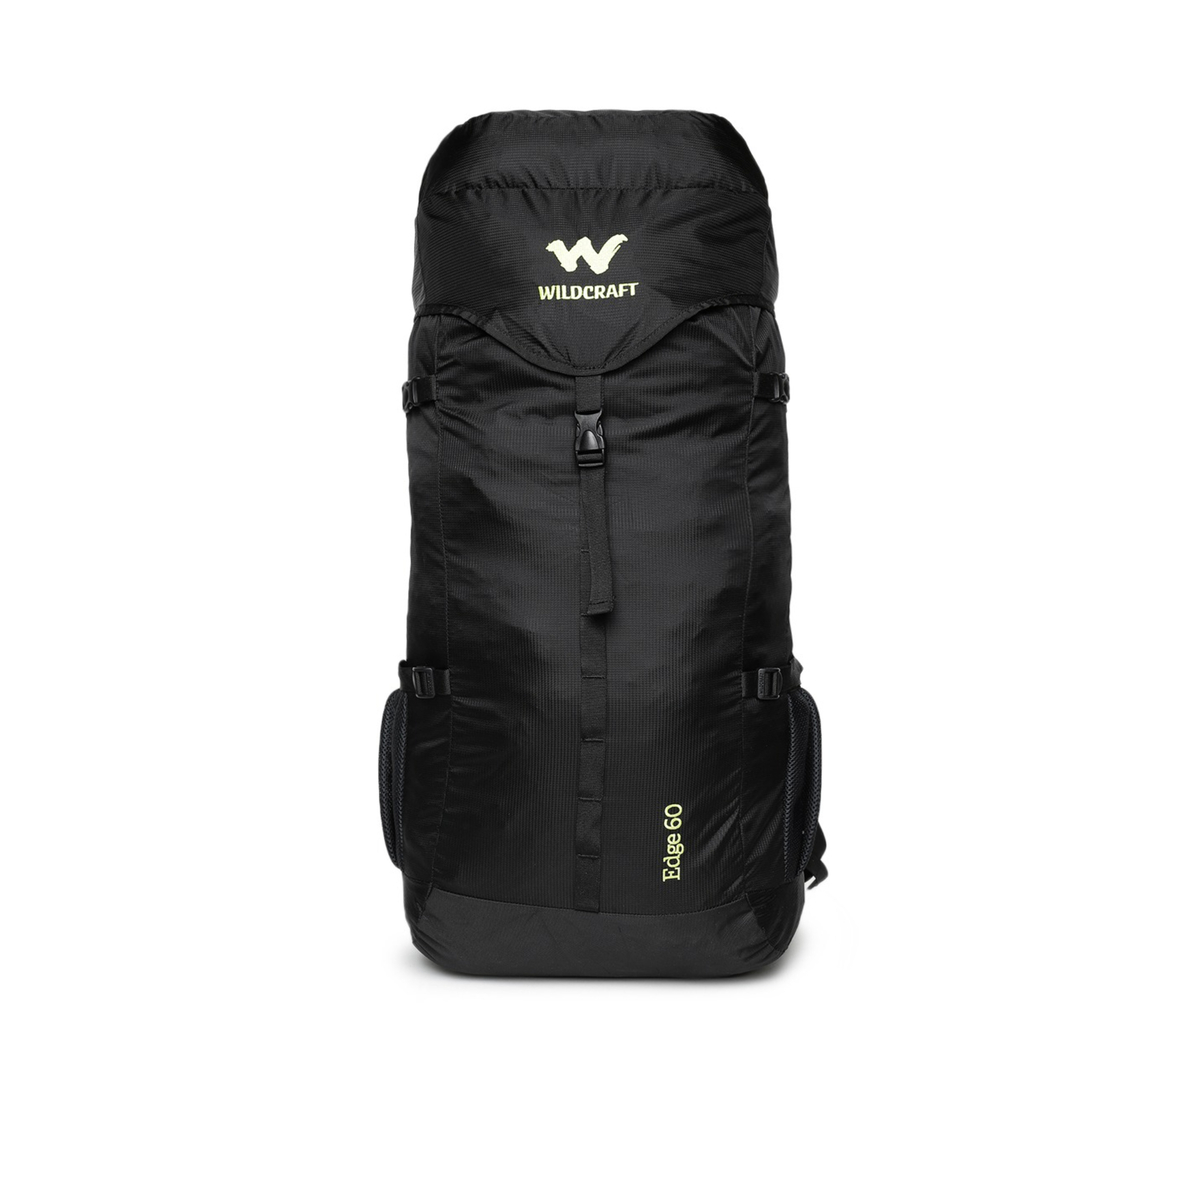 Wildcraft RS Edge 60 Camping Backpack, 60 L, Black